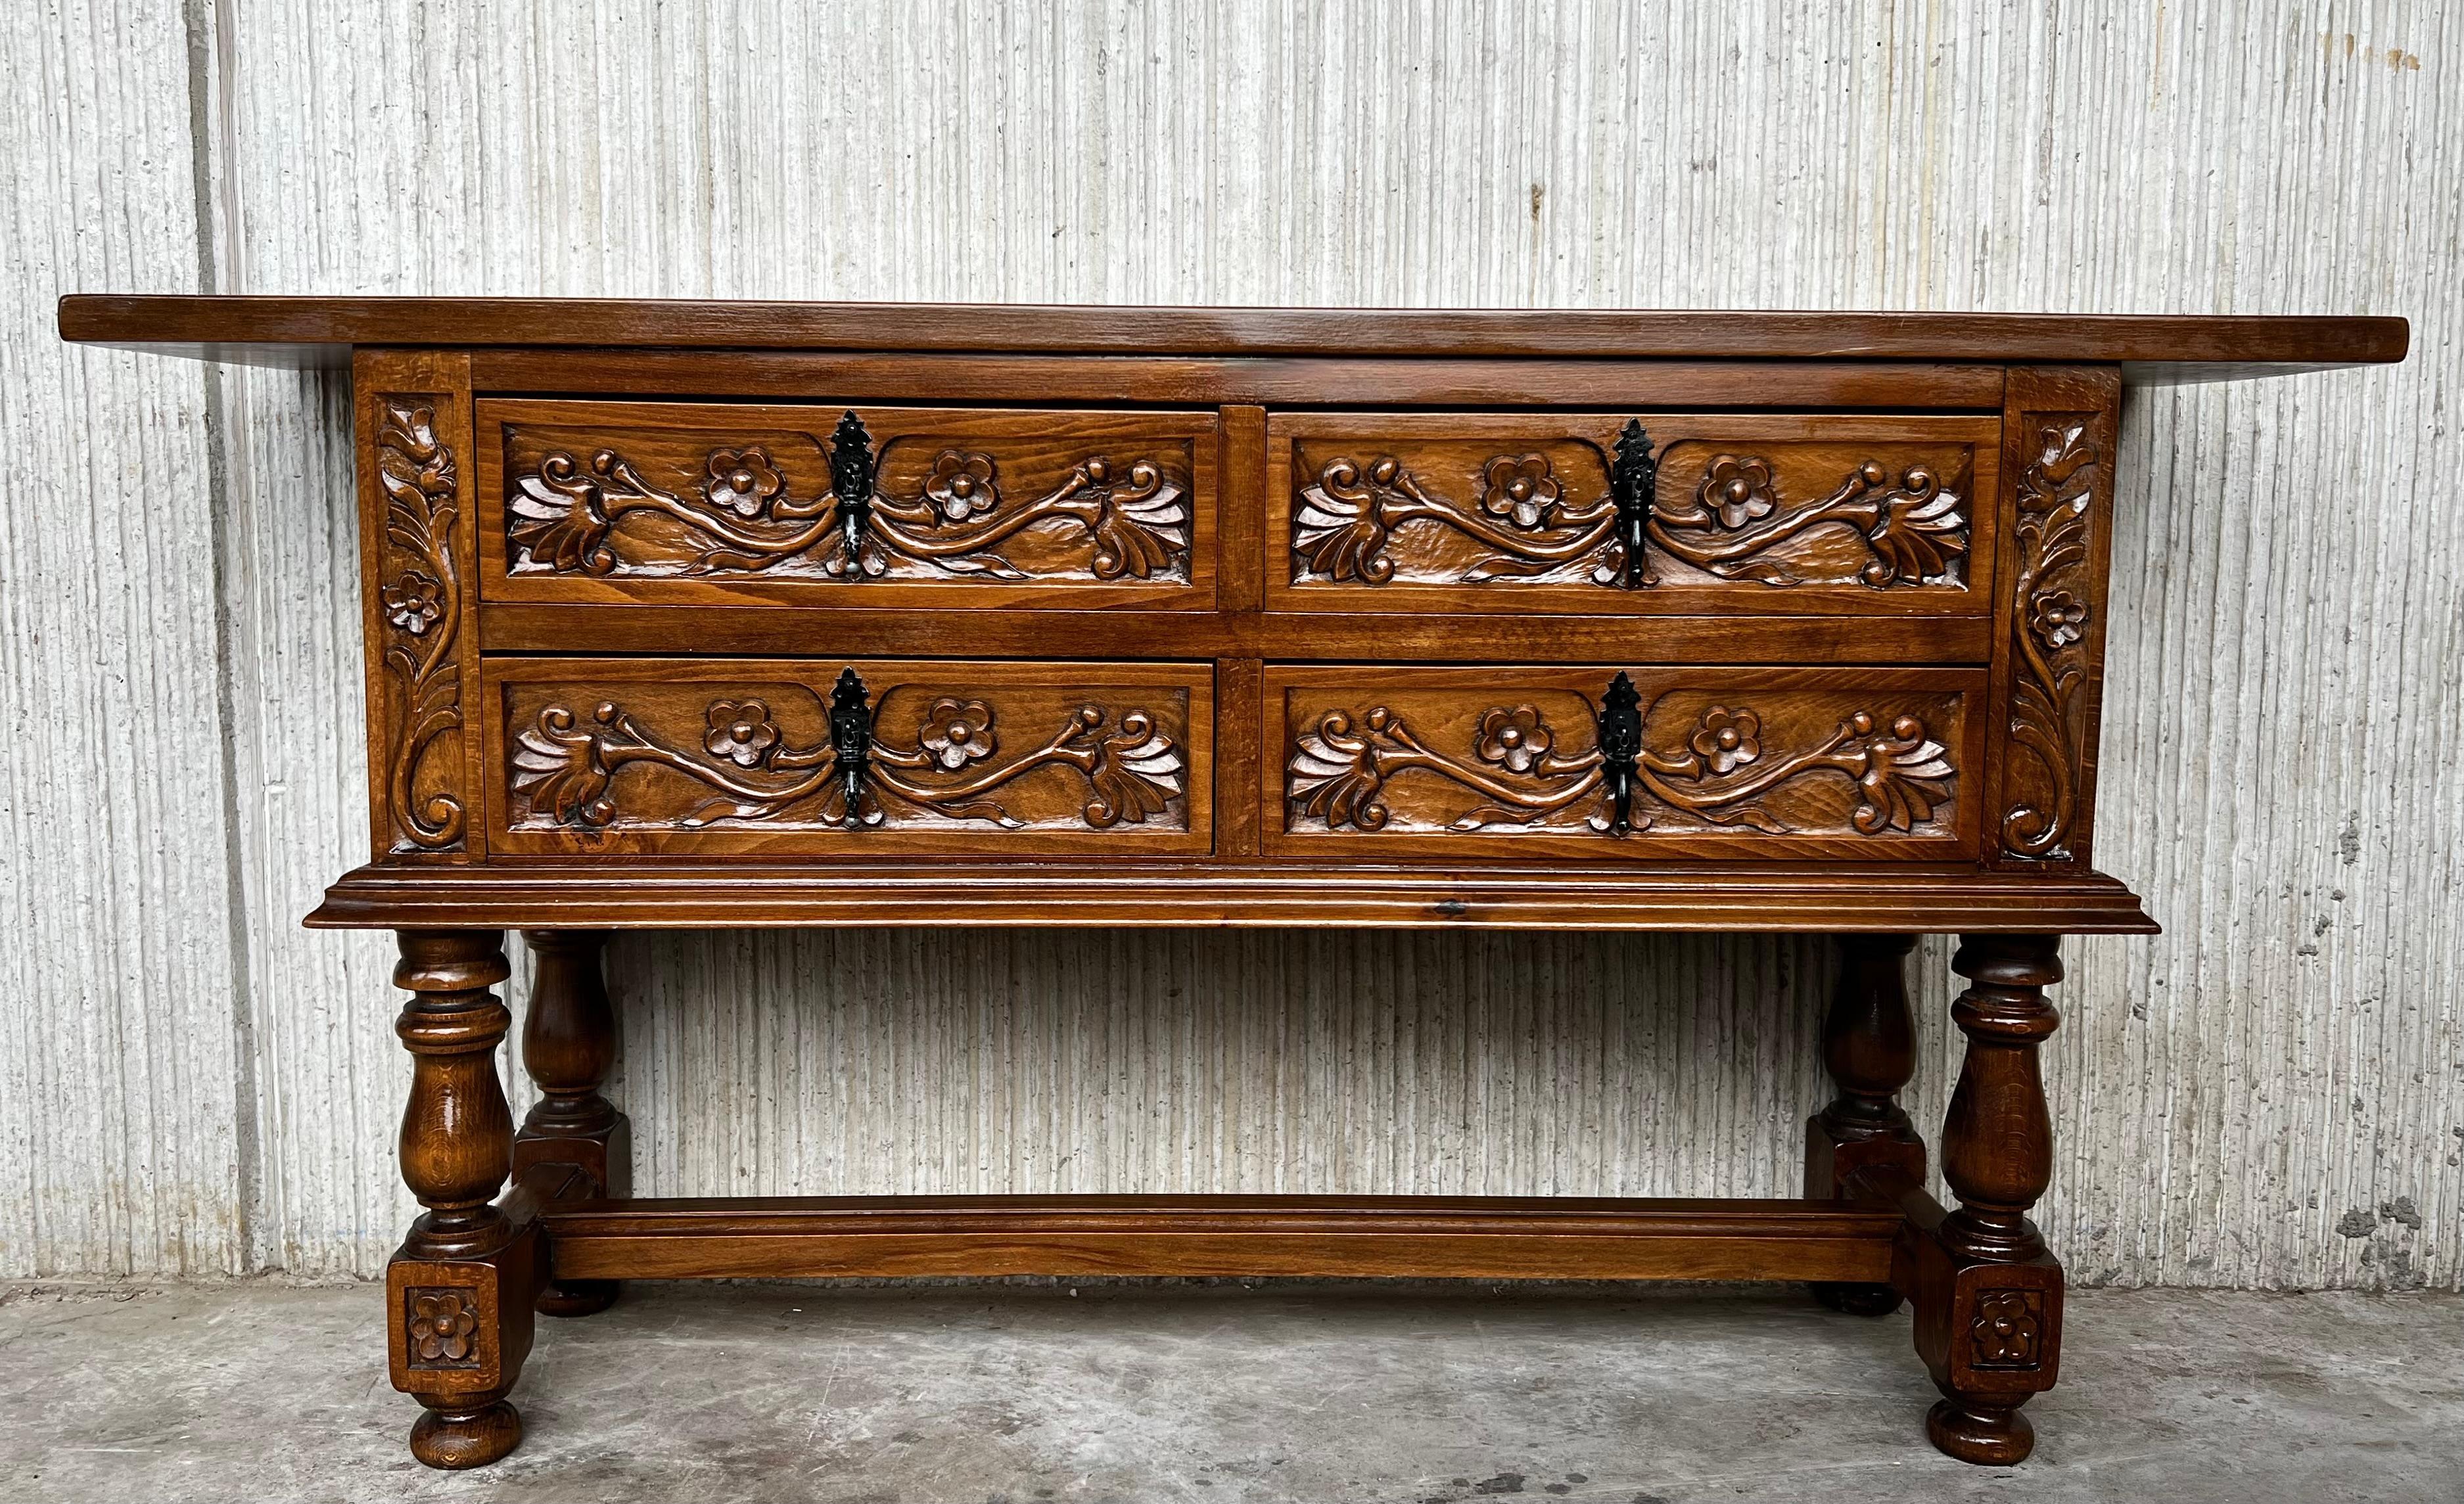 Baroque Revival Spanish Console Chest Table with Four Carved Drawers and Original Hardware For Sale